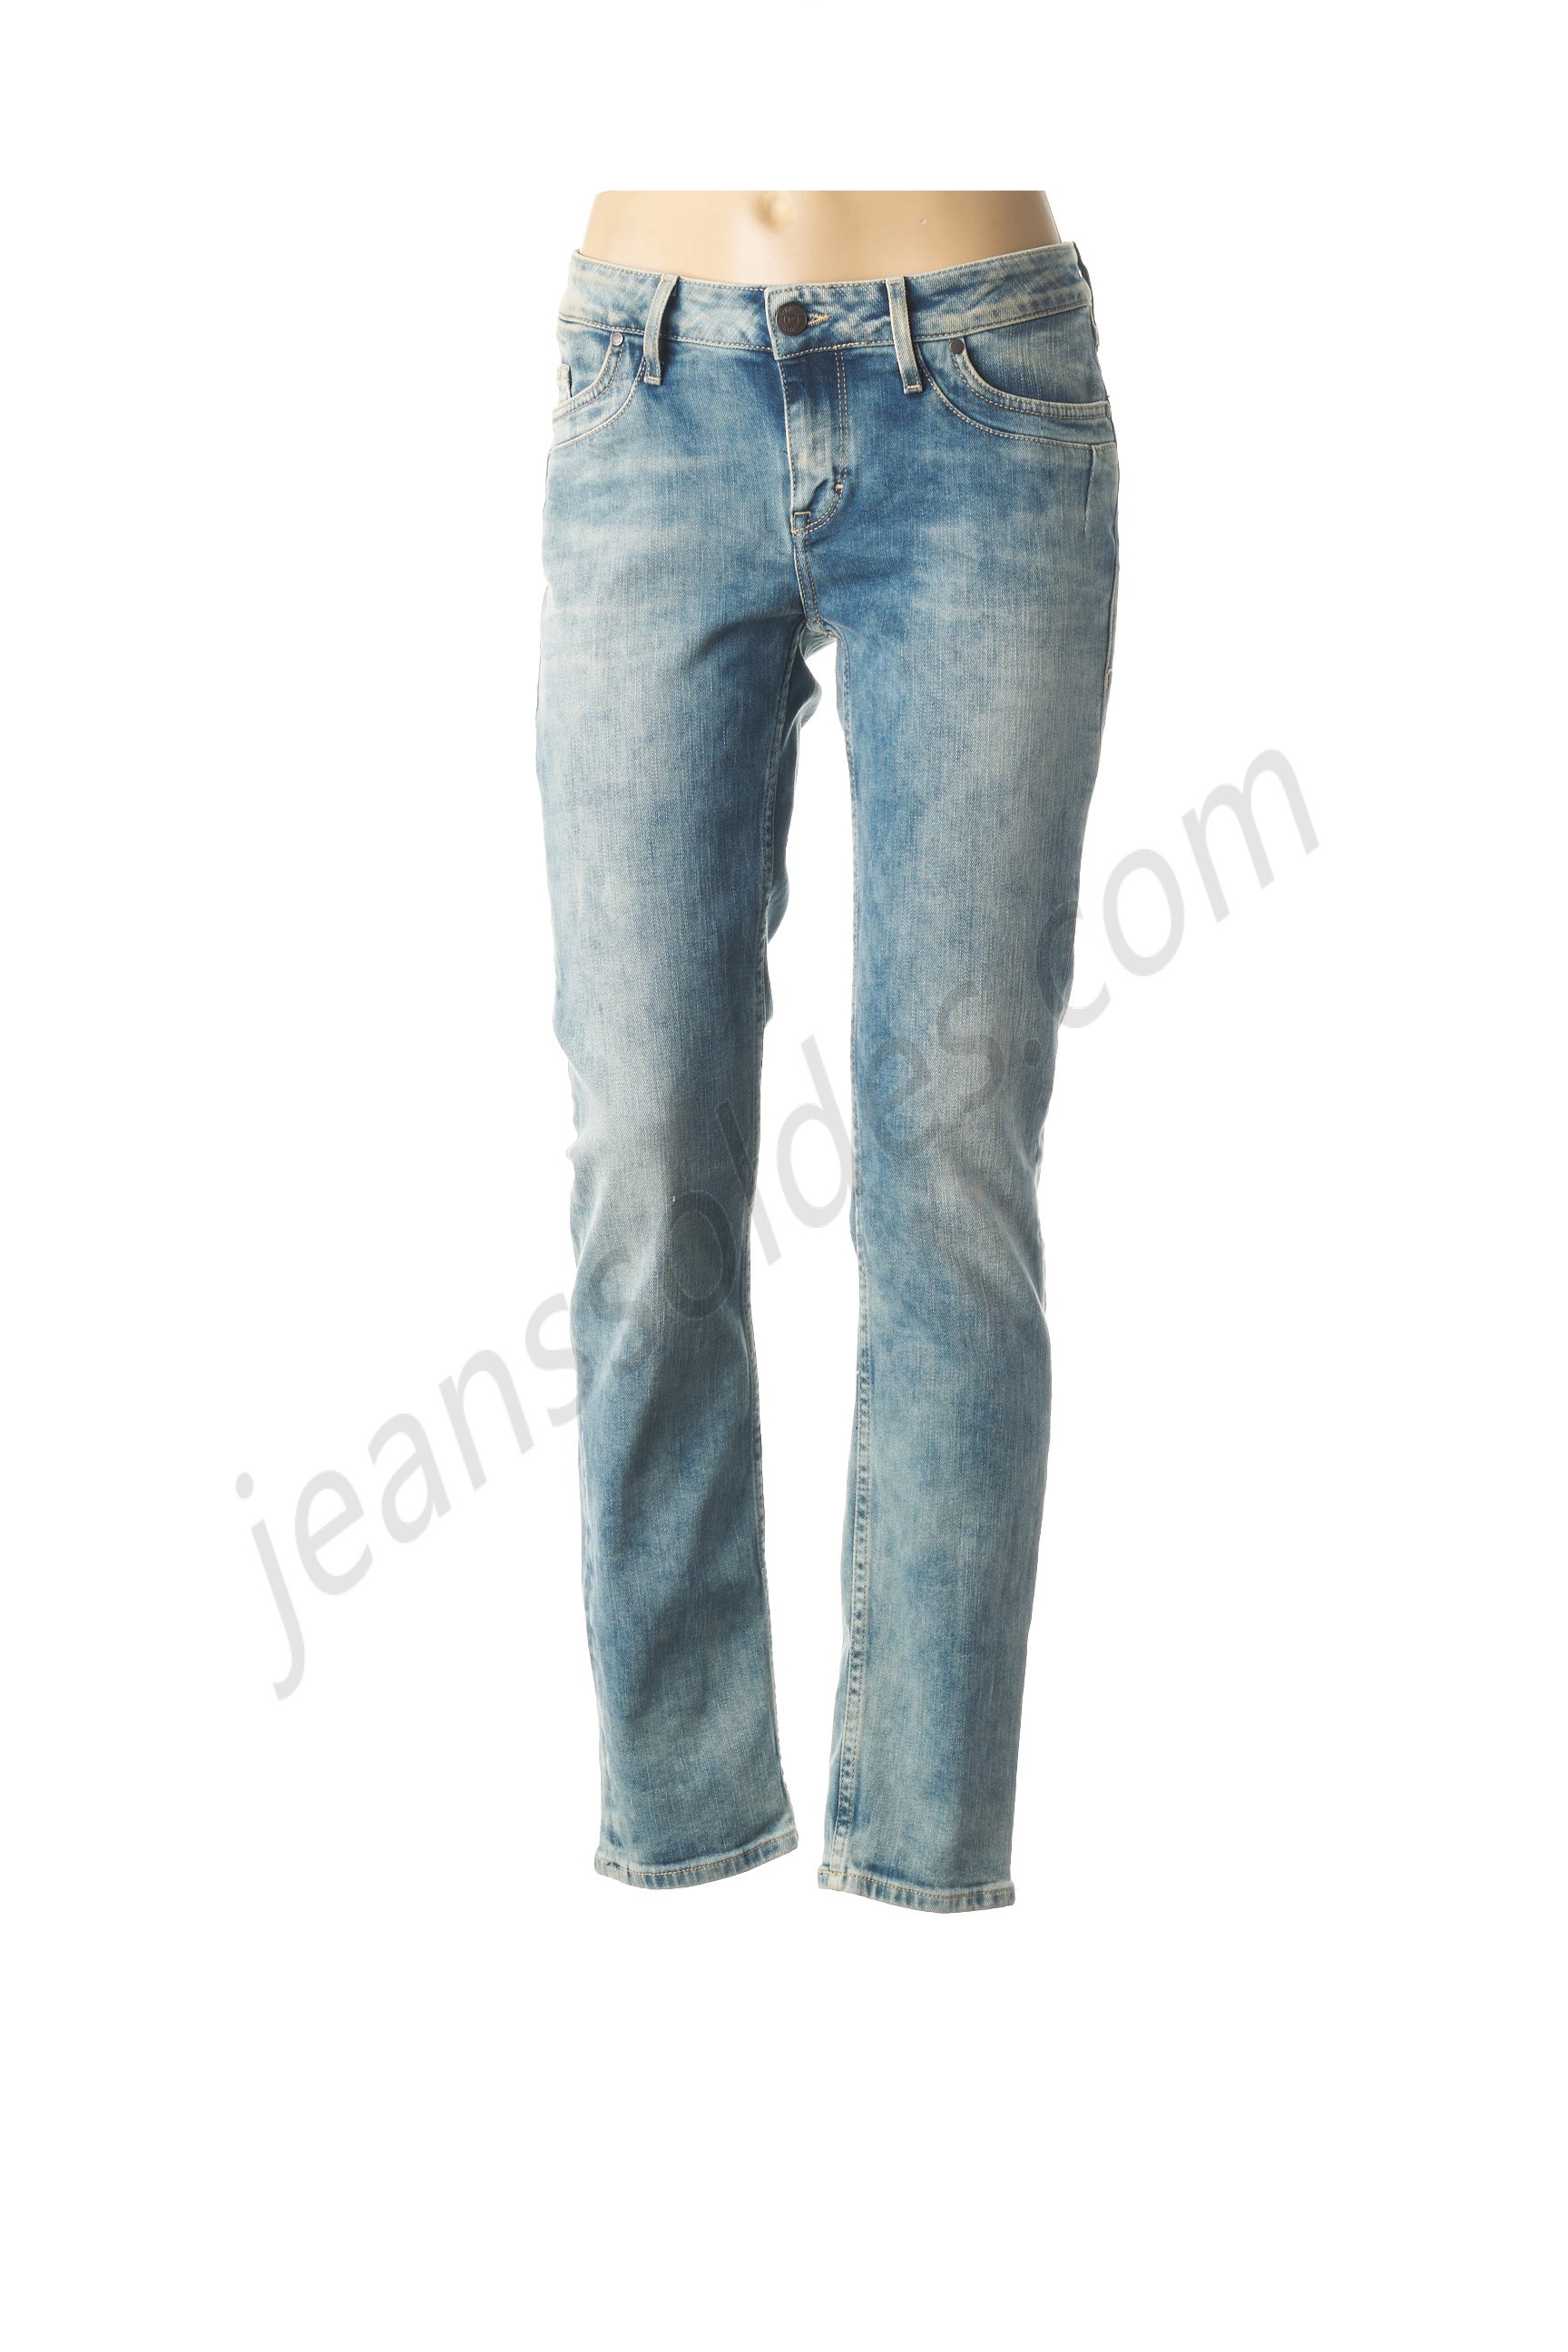 mustang-Jeans coupe slim prix d’amis - mustang-Jeans coupe slim prix d’amis